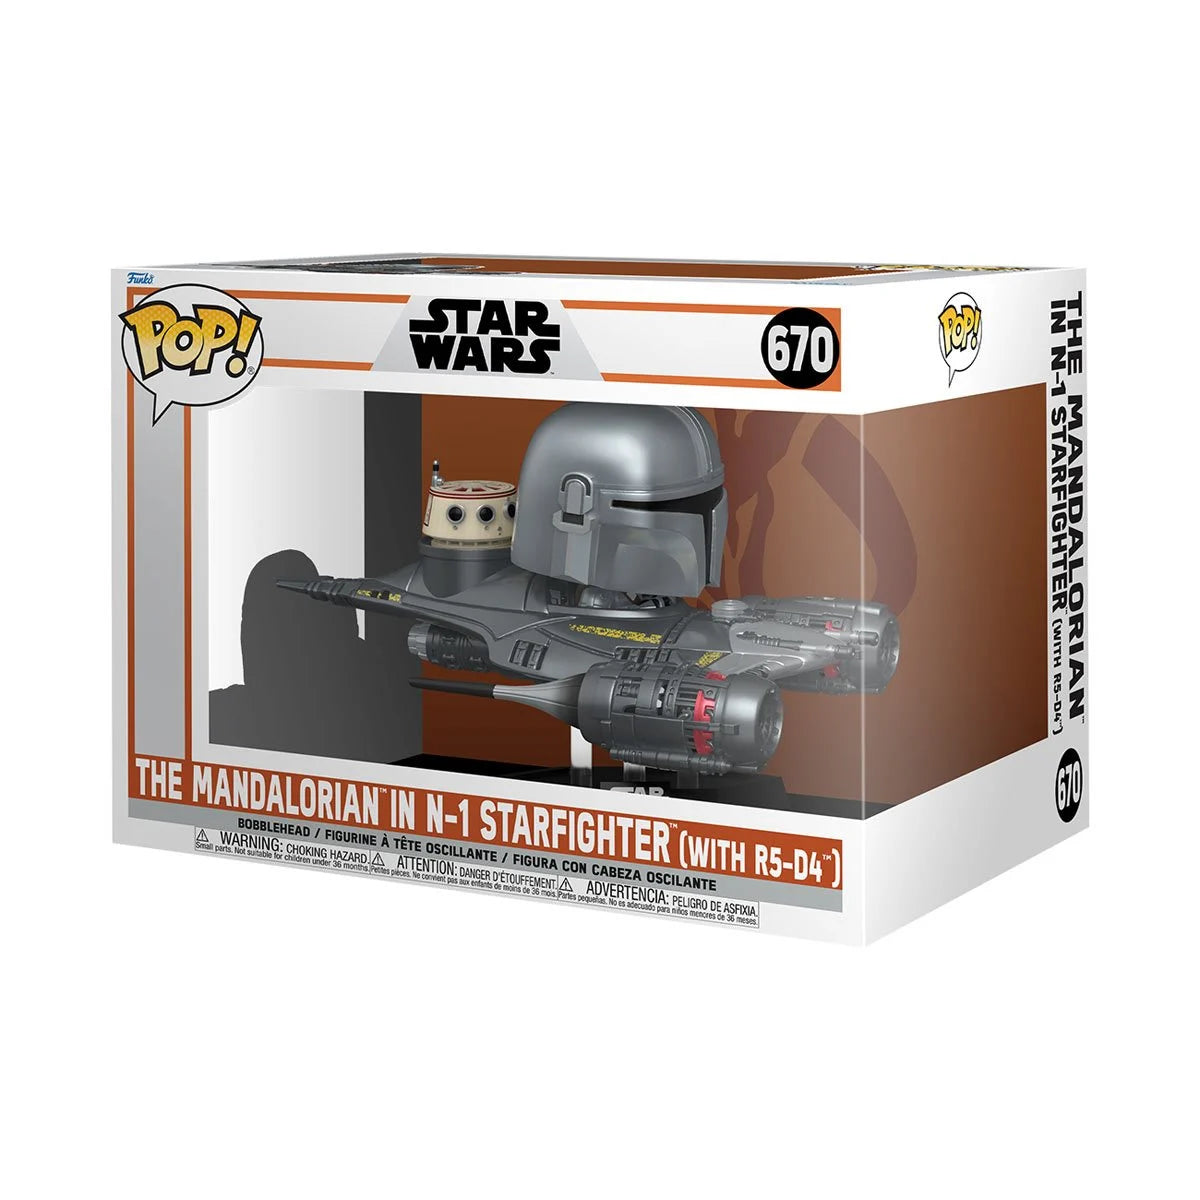 Star Wars: The Mandalorian in N-1 Starfighter (with R5-D4) Funko Pop! Ride #670